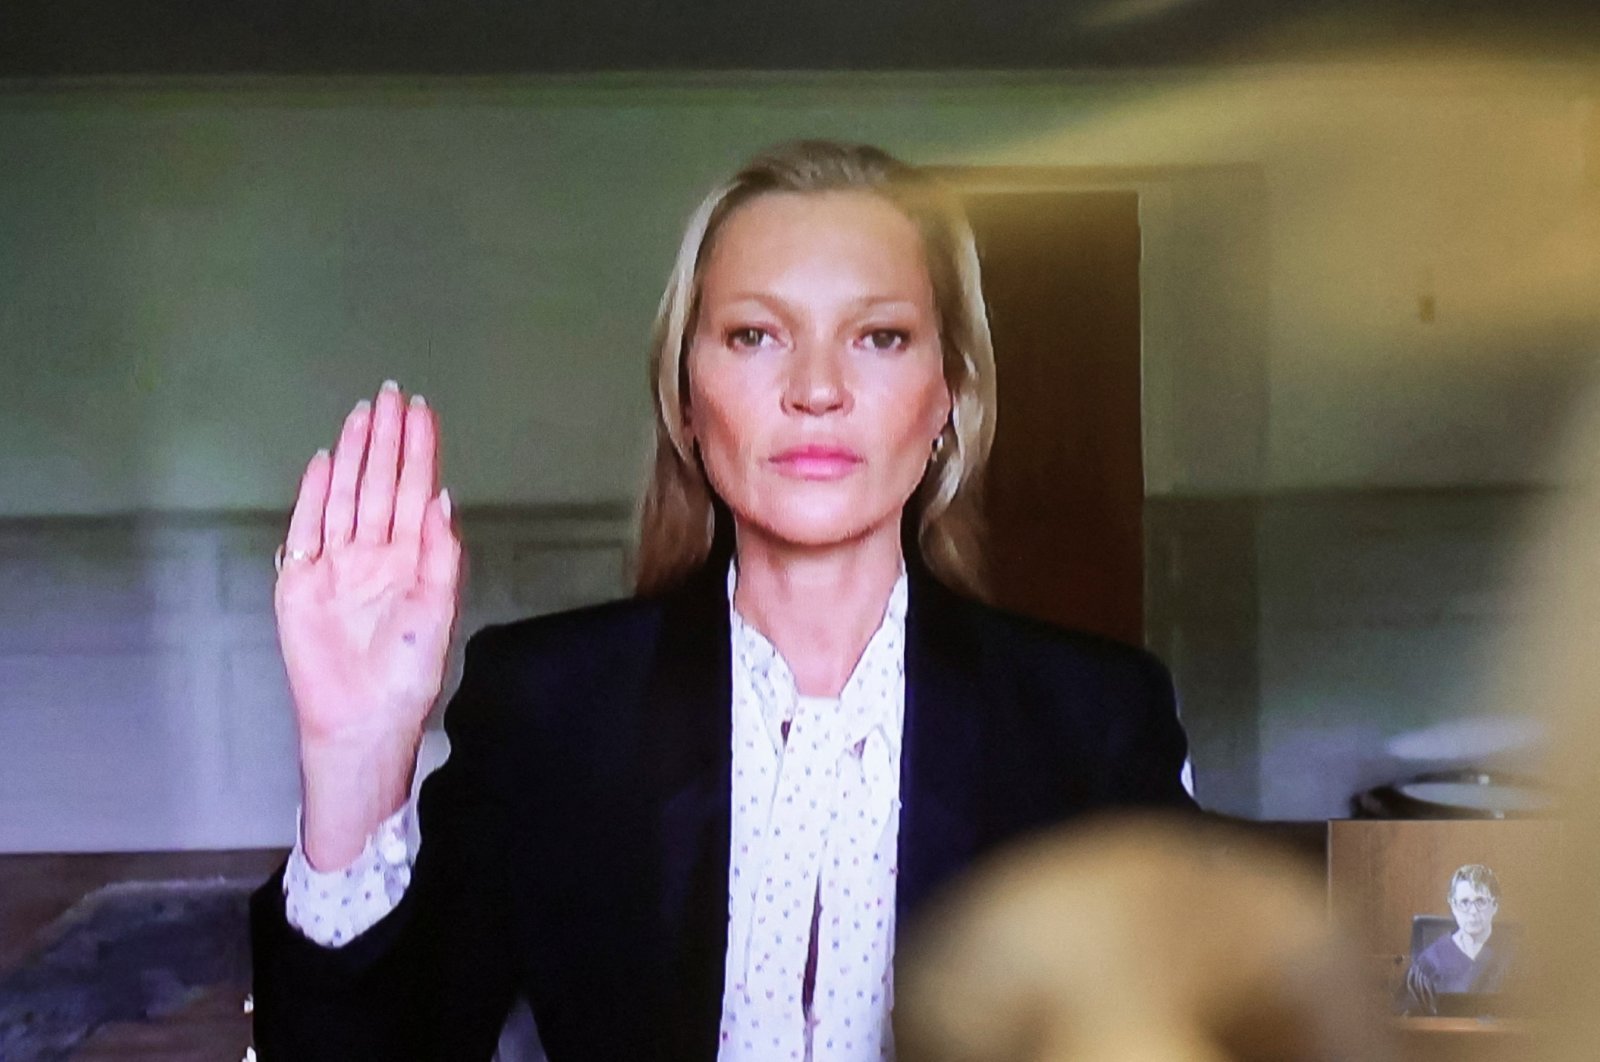 Model Kate Moss, a former girlfriend of actor Johnny Depp,  is sworn in to testify via video link during Depp&#039;s defamation trial against his ex-wife Amber Heard, at the Fairfax County Circuit Courthouse in Fairfax, Virginia, U.S., May 25, 2022. (Reuters Photo)